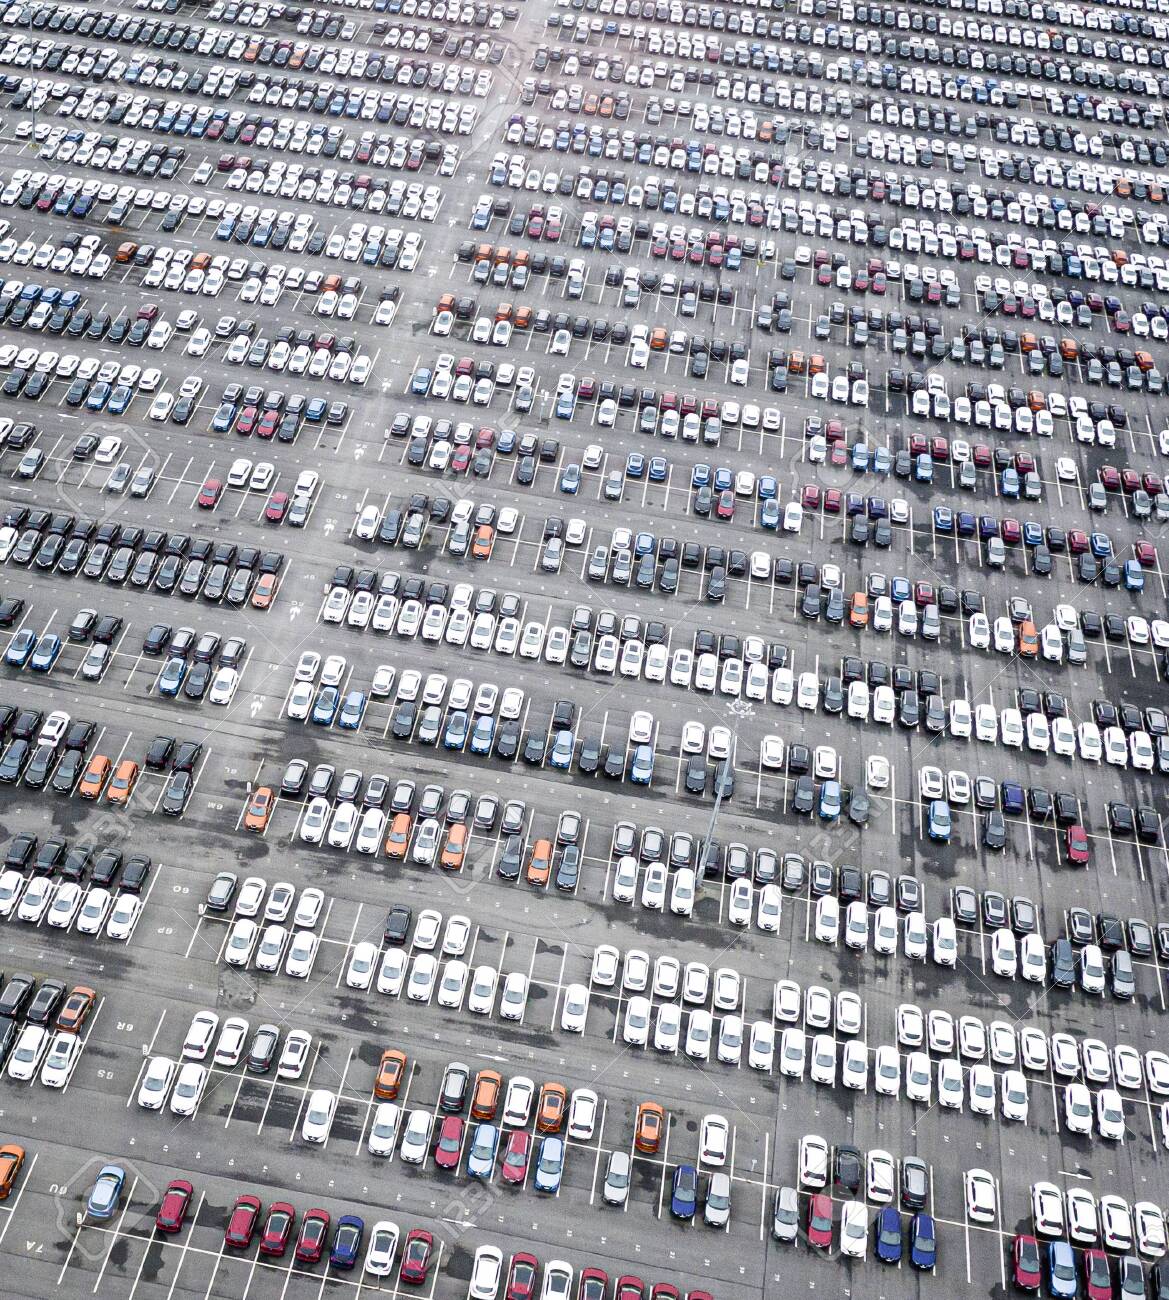 143593118-rows-of-new-cars-in-the-parking-lot-aerial-view-of-large-parking-lot-full-of-cars-of-various-colors.jpg